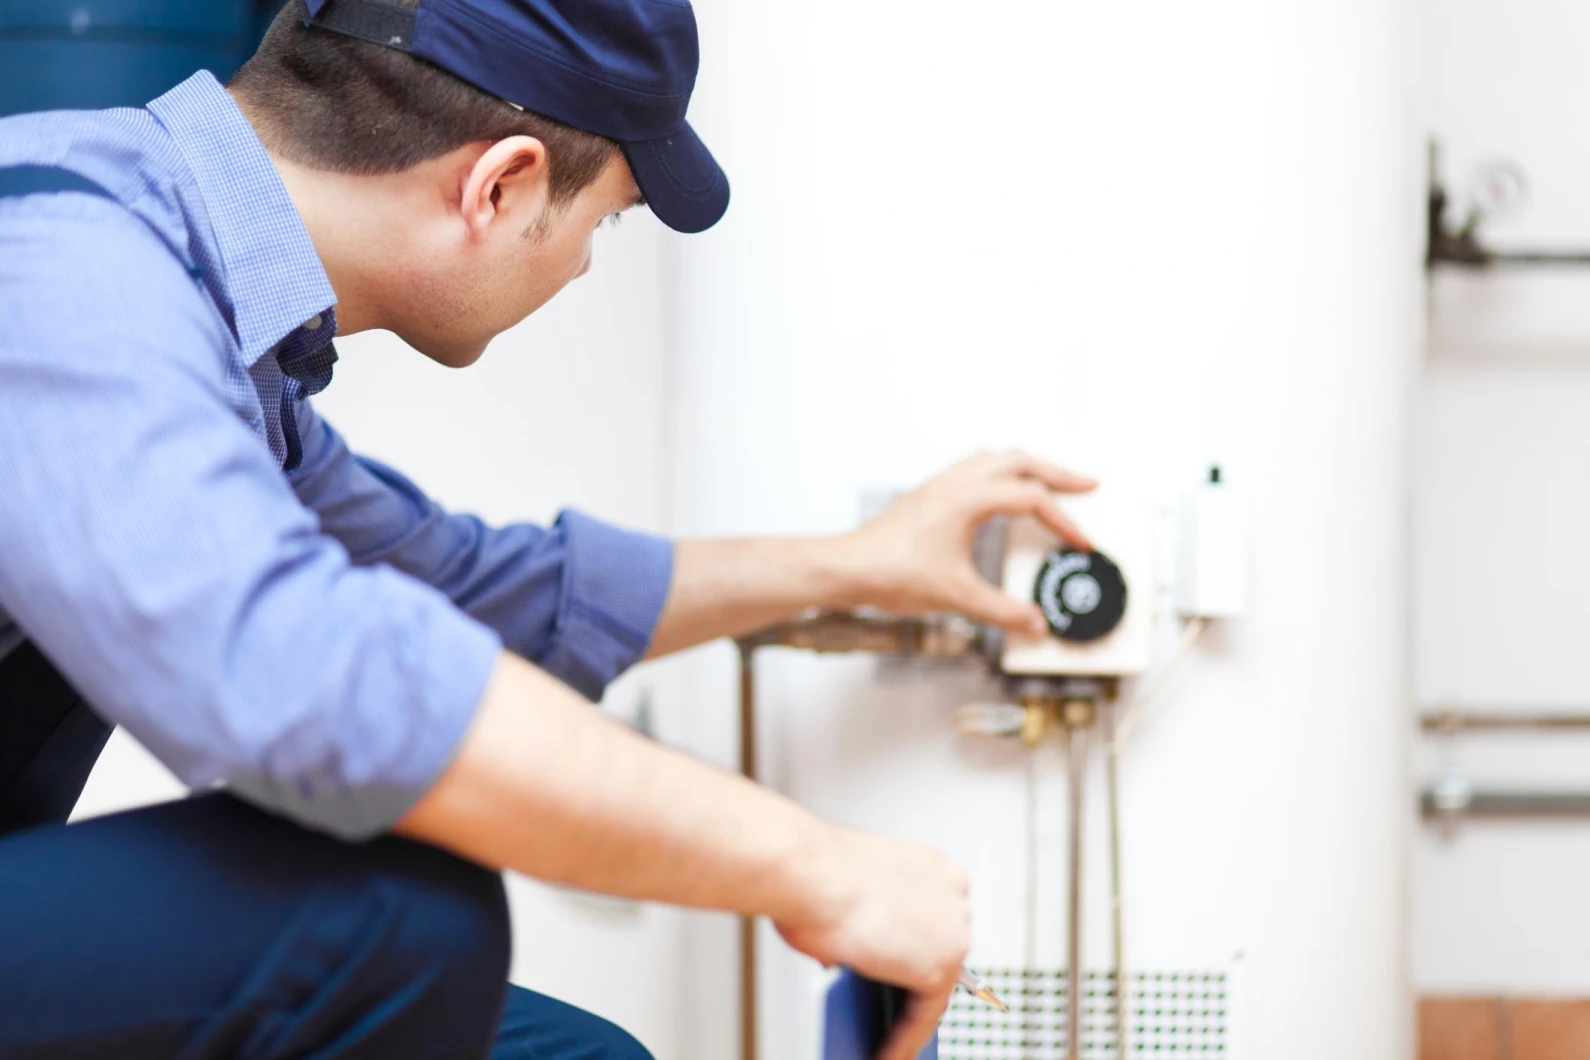 Plumbing Insurance for Your Home